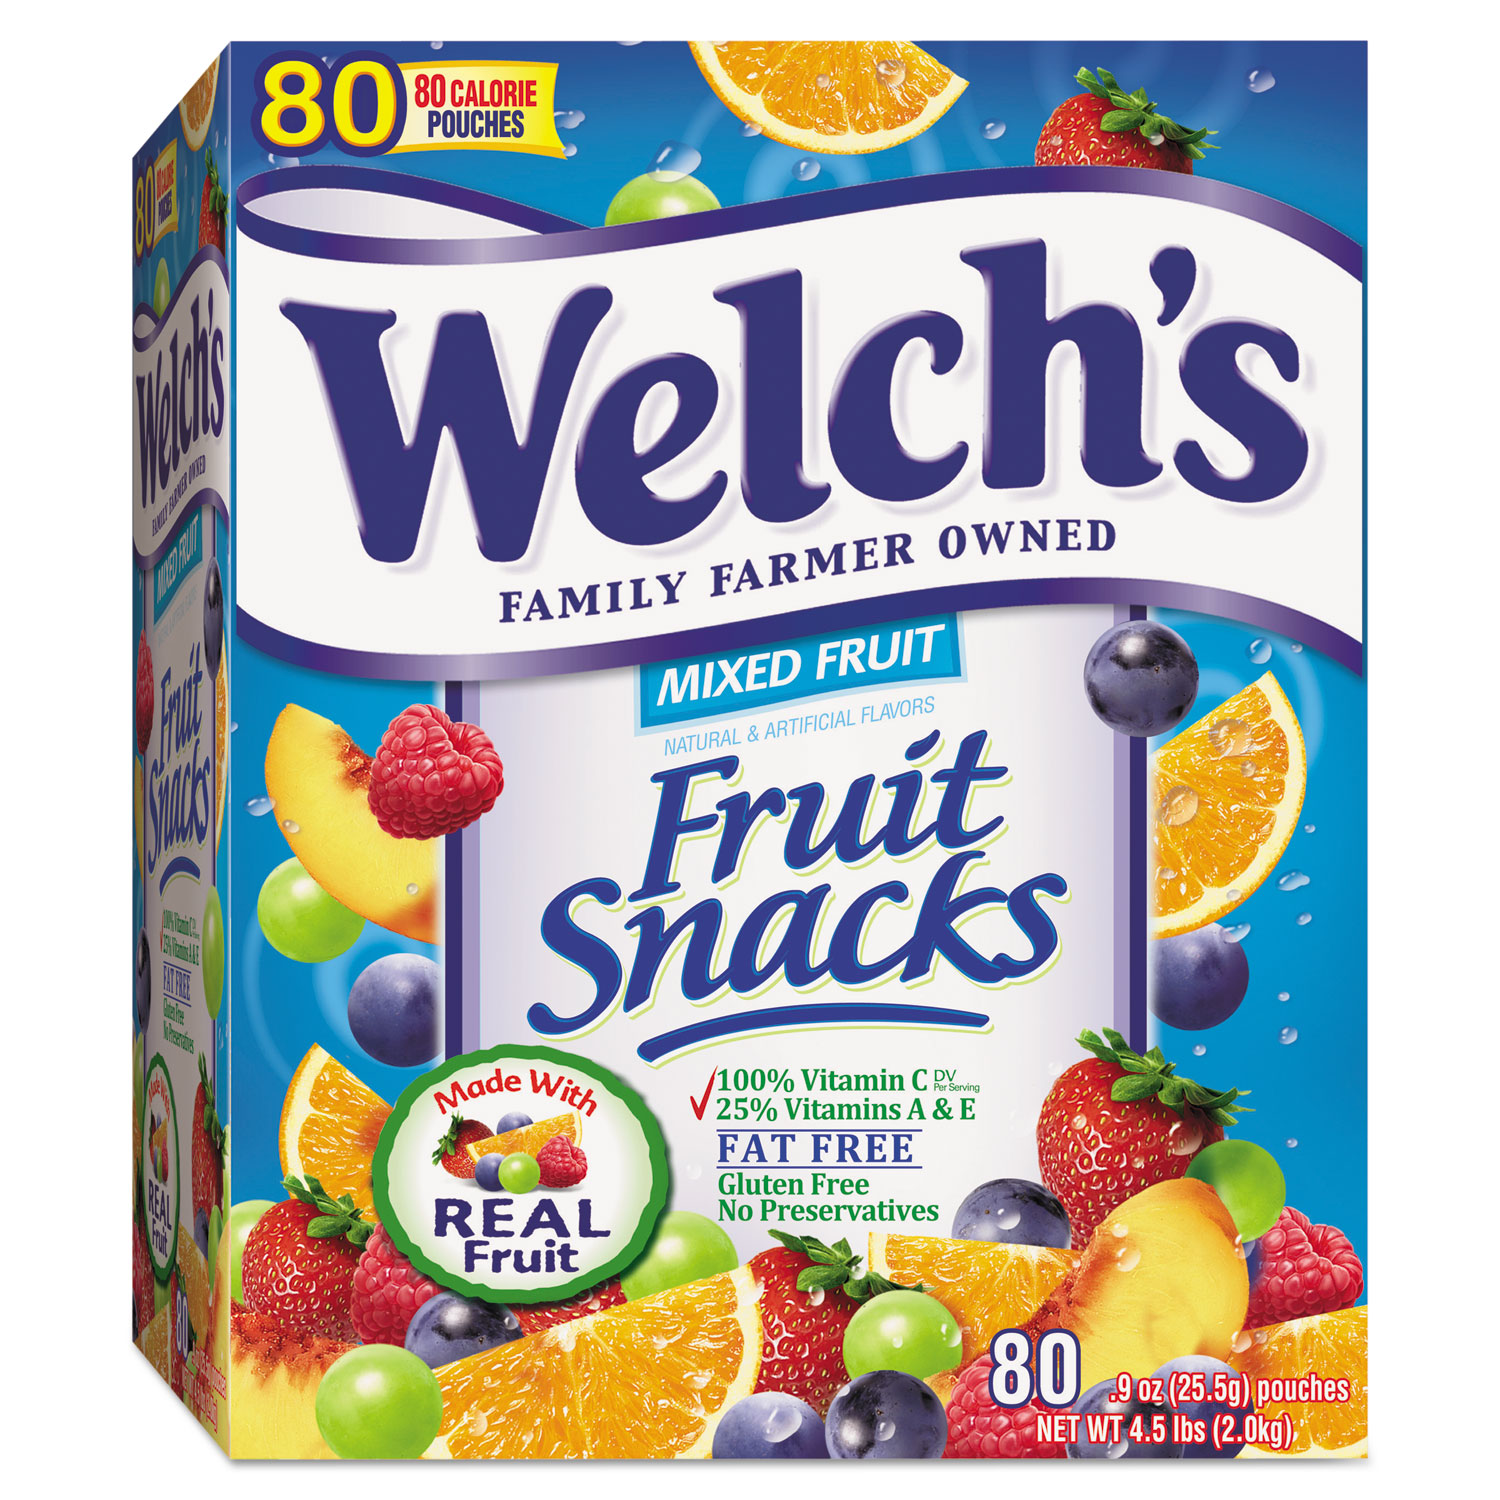 Be the first to review “Welch’s Mixed Fruit Snacks (175 g)” Cancel reply